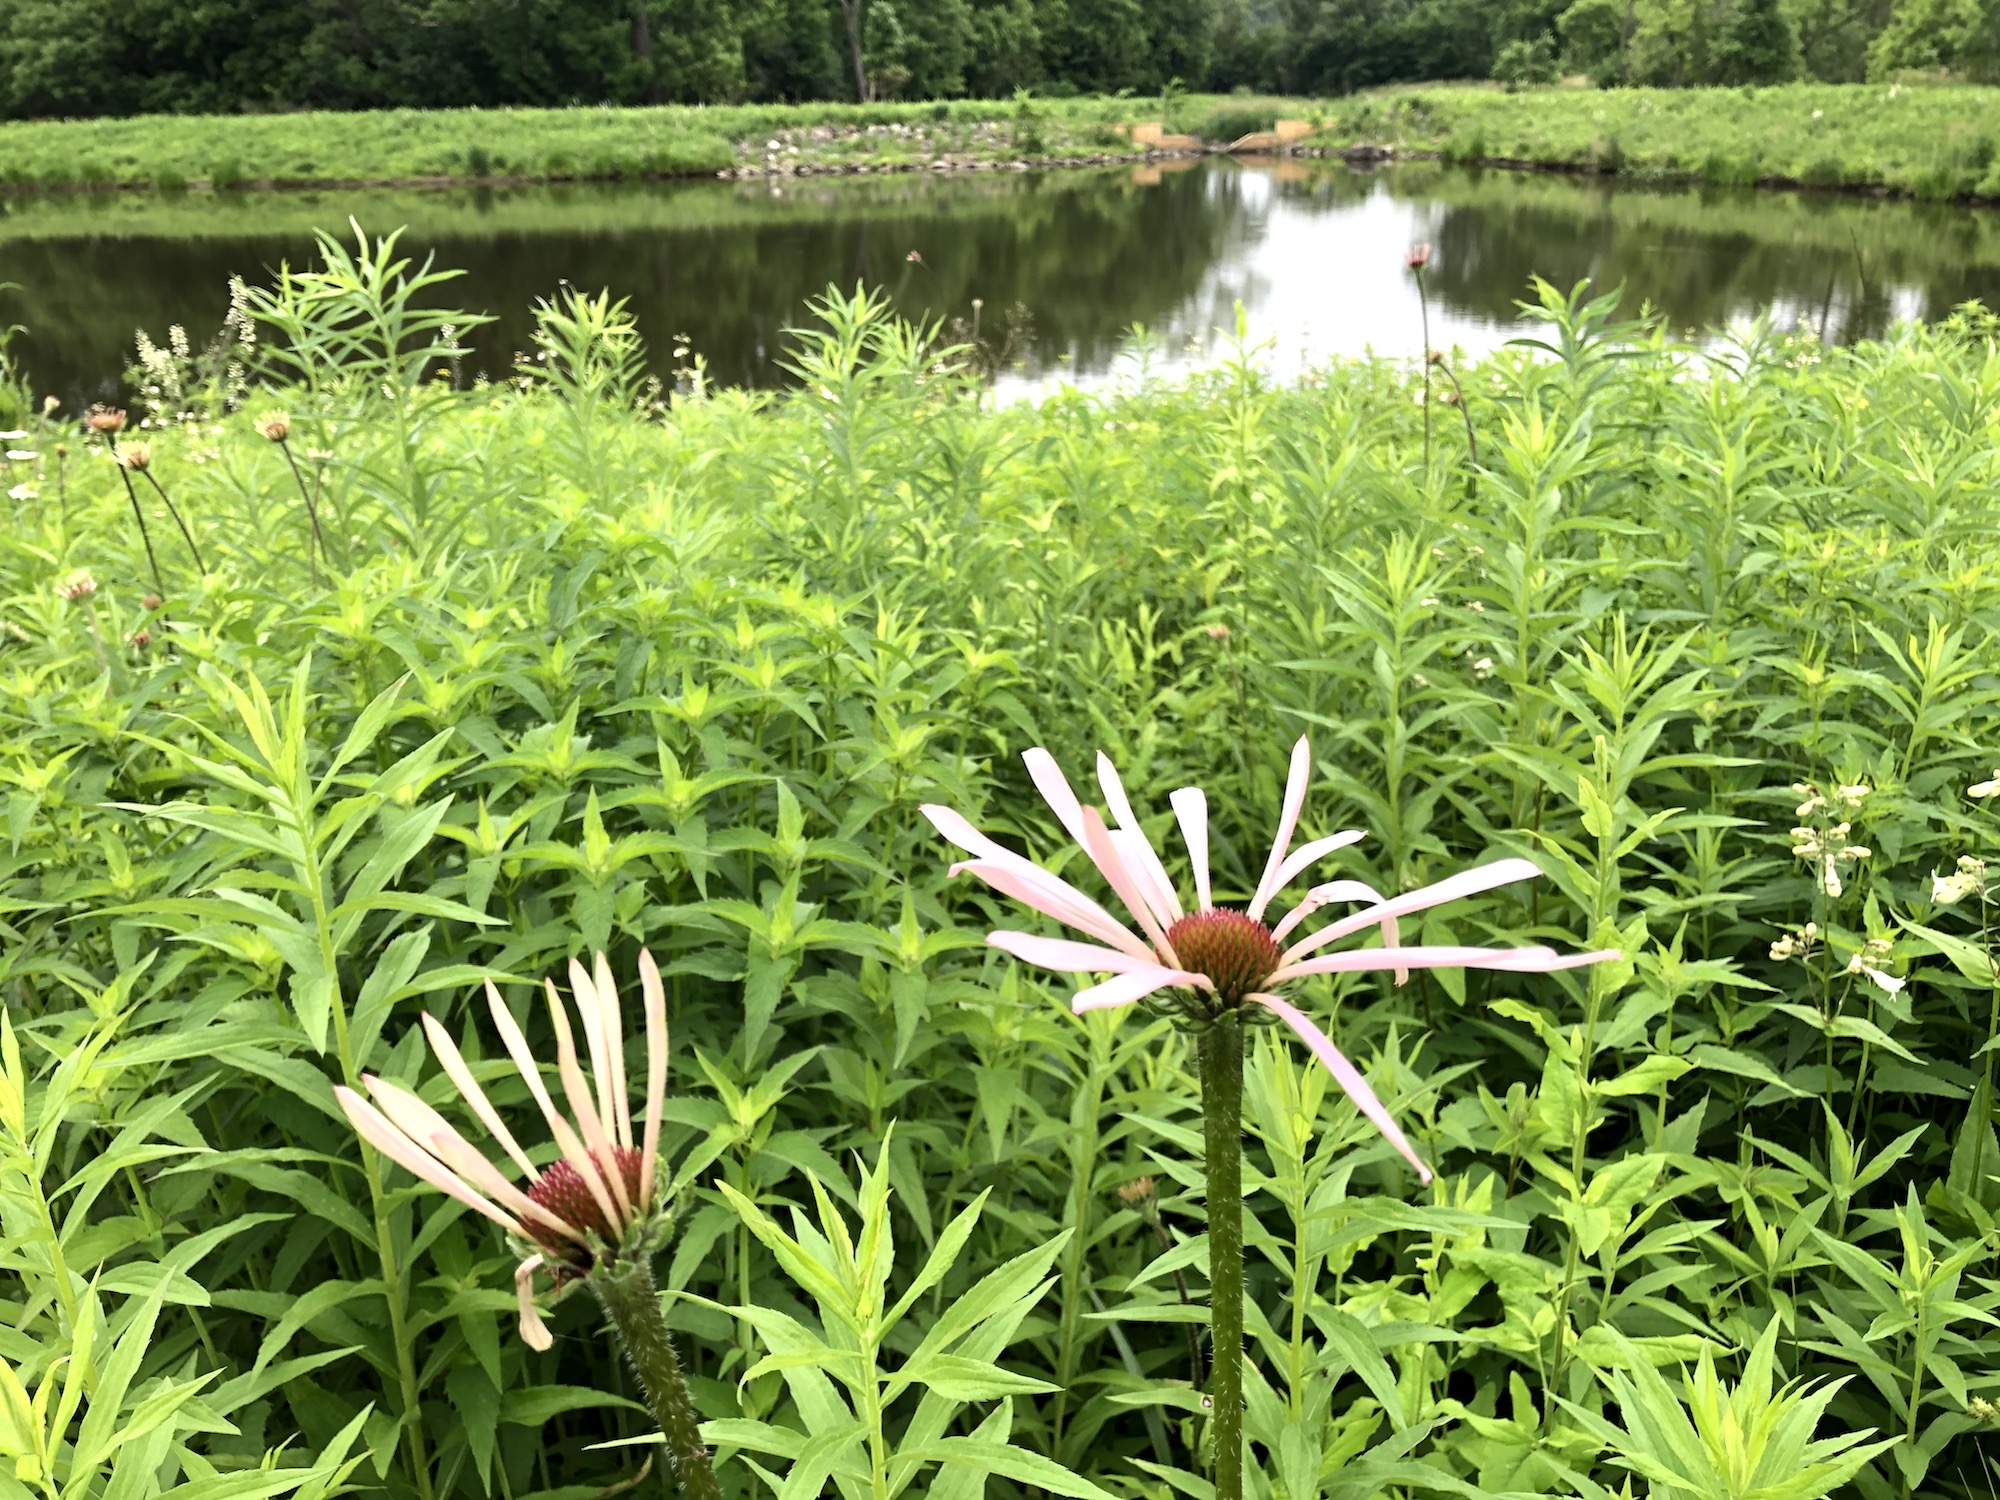 Pale purple coneflower on bank of Retaining Pond on corner of Nakoma Road and Manitou Way on June 17, 2019.